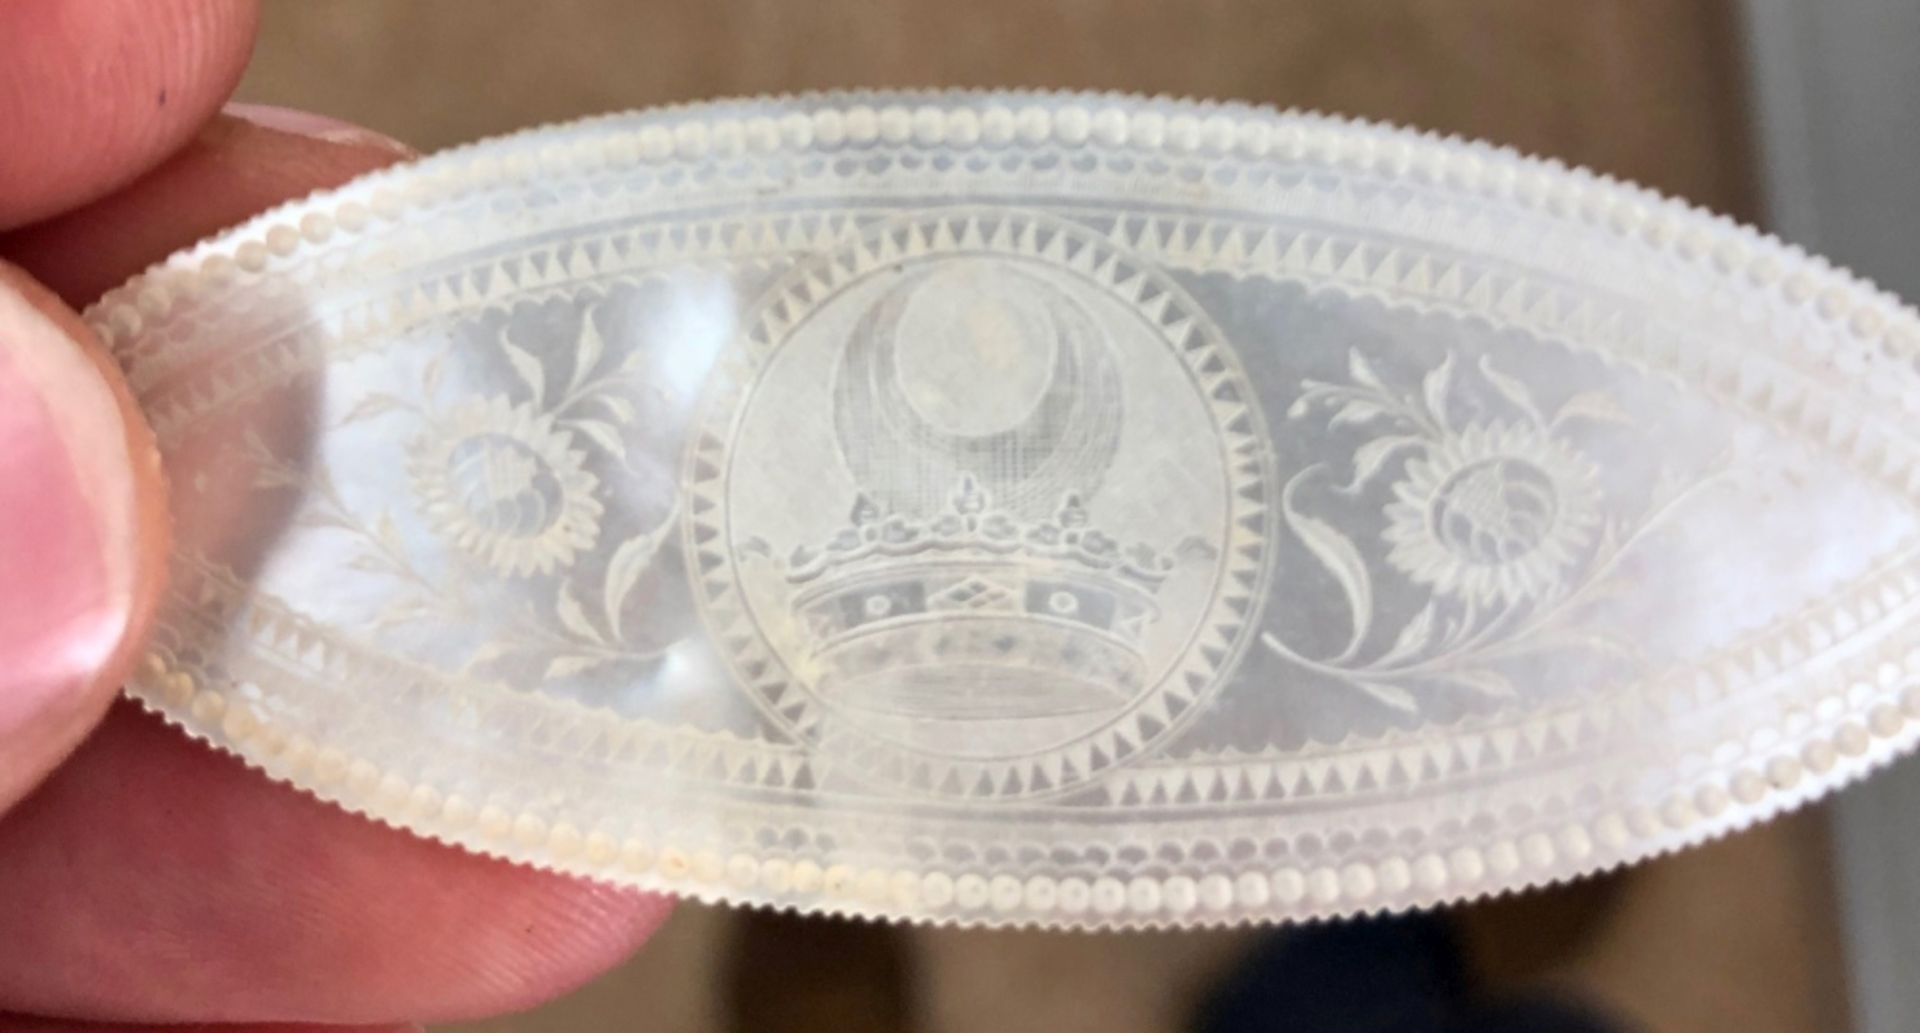 A set of 24 Chinese mother of pearl navette shape gaming counters, first half 19th century, - Image 3 of 4